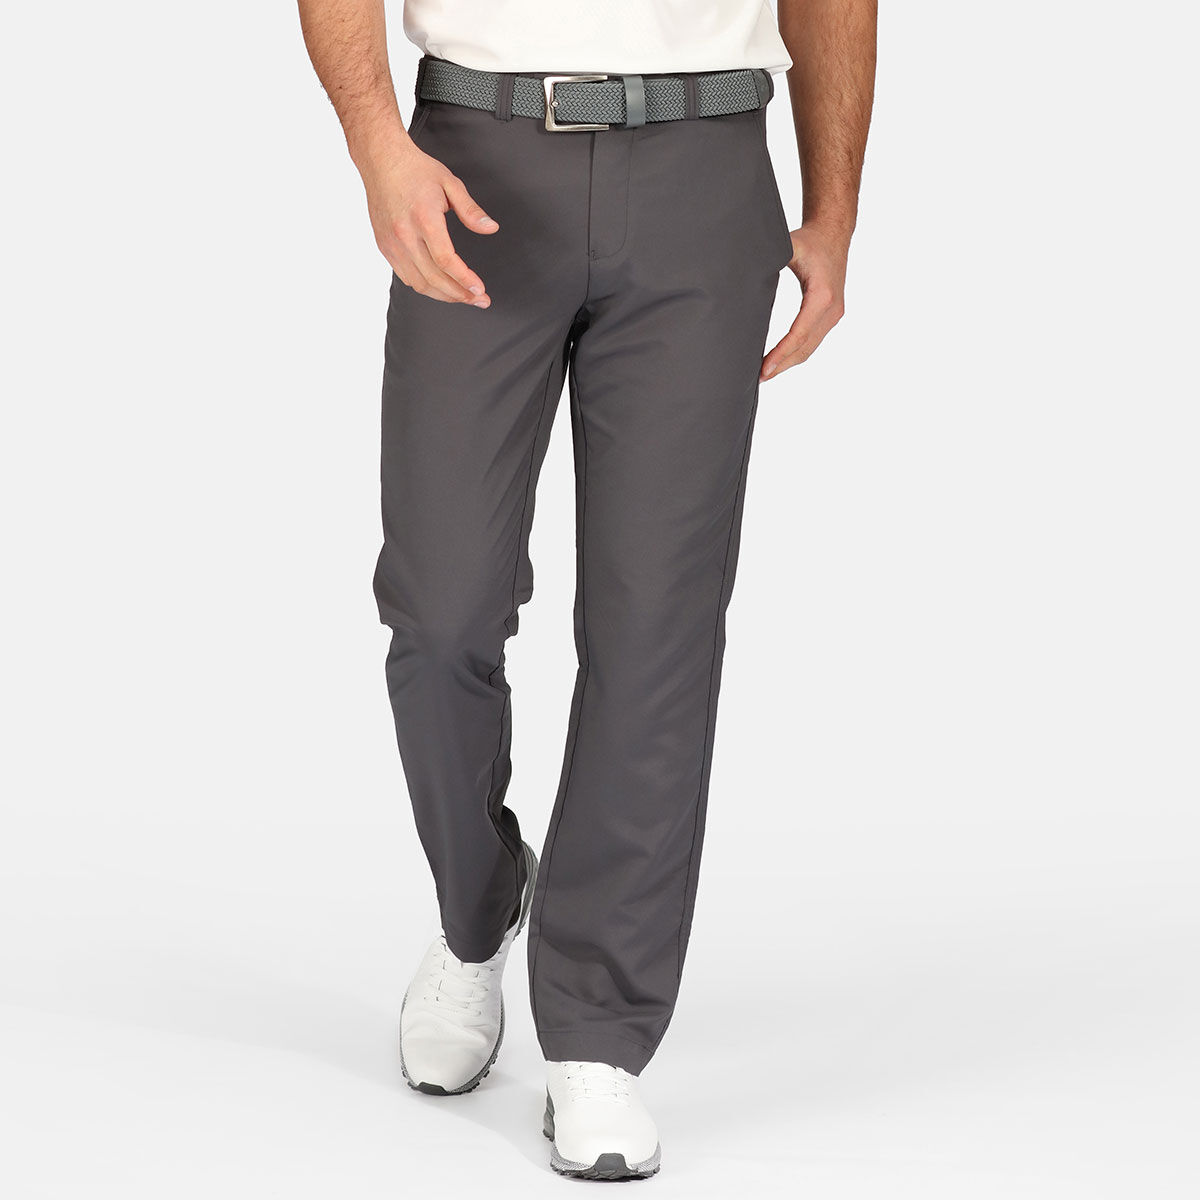 Stromberg Men's Weather Tech Stretch Golf Trousers, Mens, Grey, 46, Short | American Golf - Father's Day Gift von Stromberg